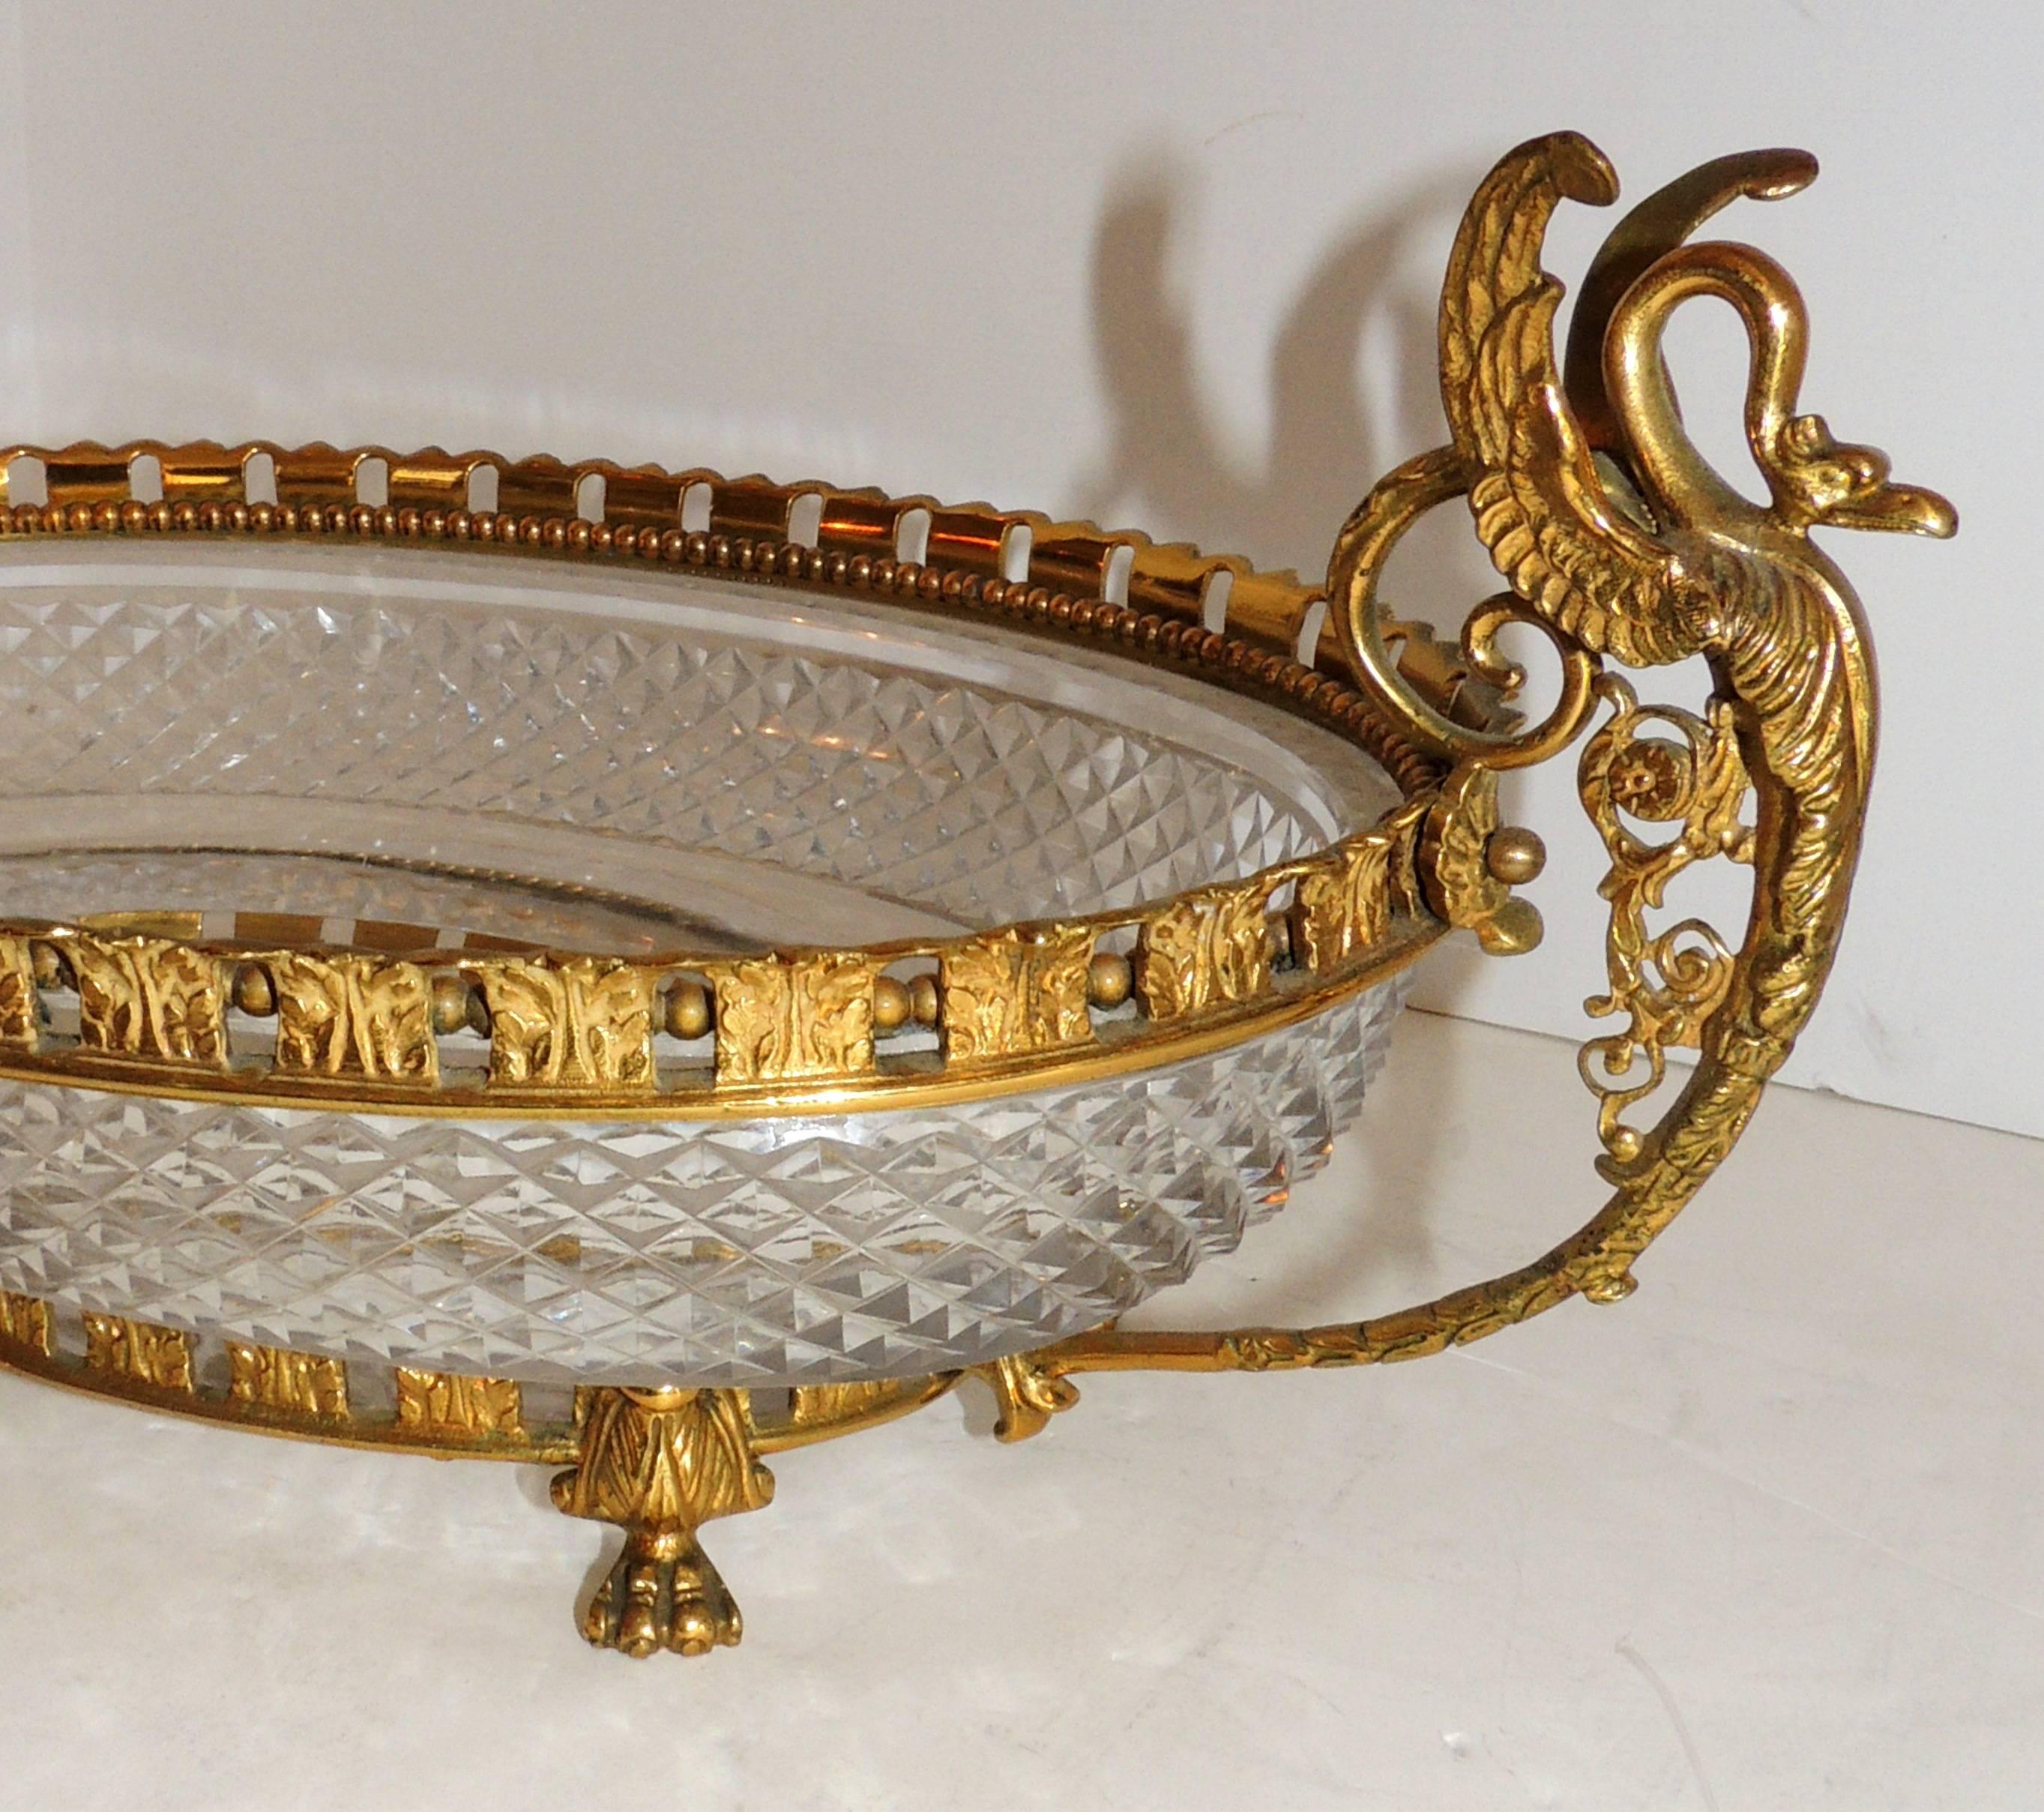 A wonderful French neoclassical gilt bronze and diamond cut crystal oval centerpiece 
with swan handles in the manner of Baccarat, circa 1940s.

